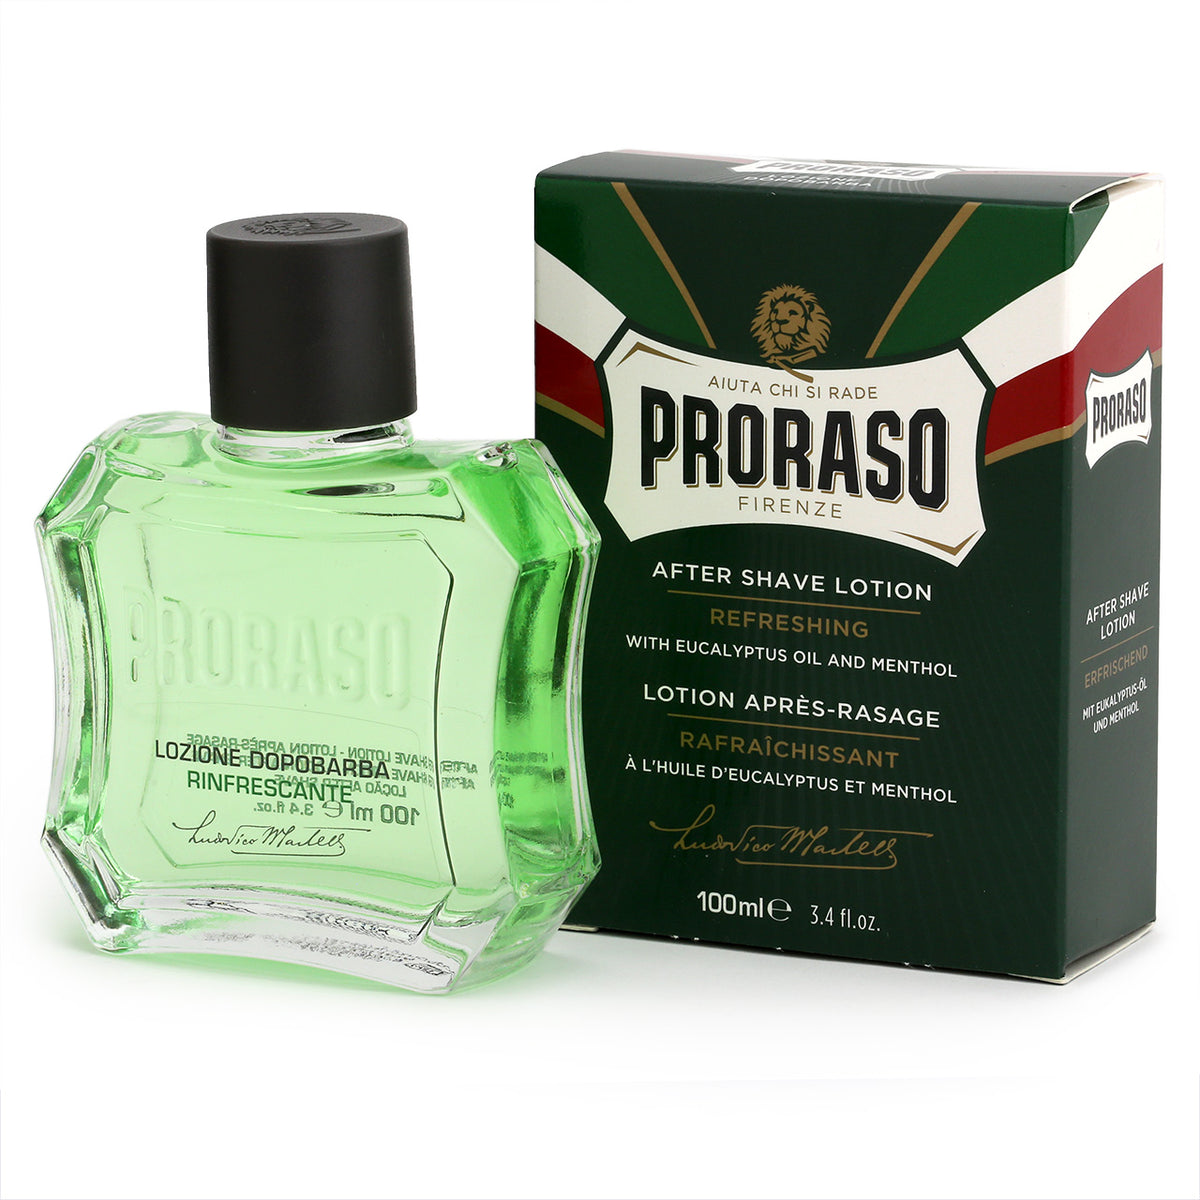 Proraso After Shave Lotion with Eucalyptus &amp; Menthol - Refreshing - with retro bottle shape and box